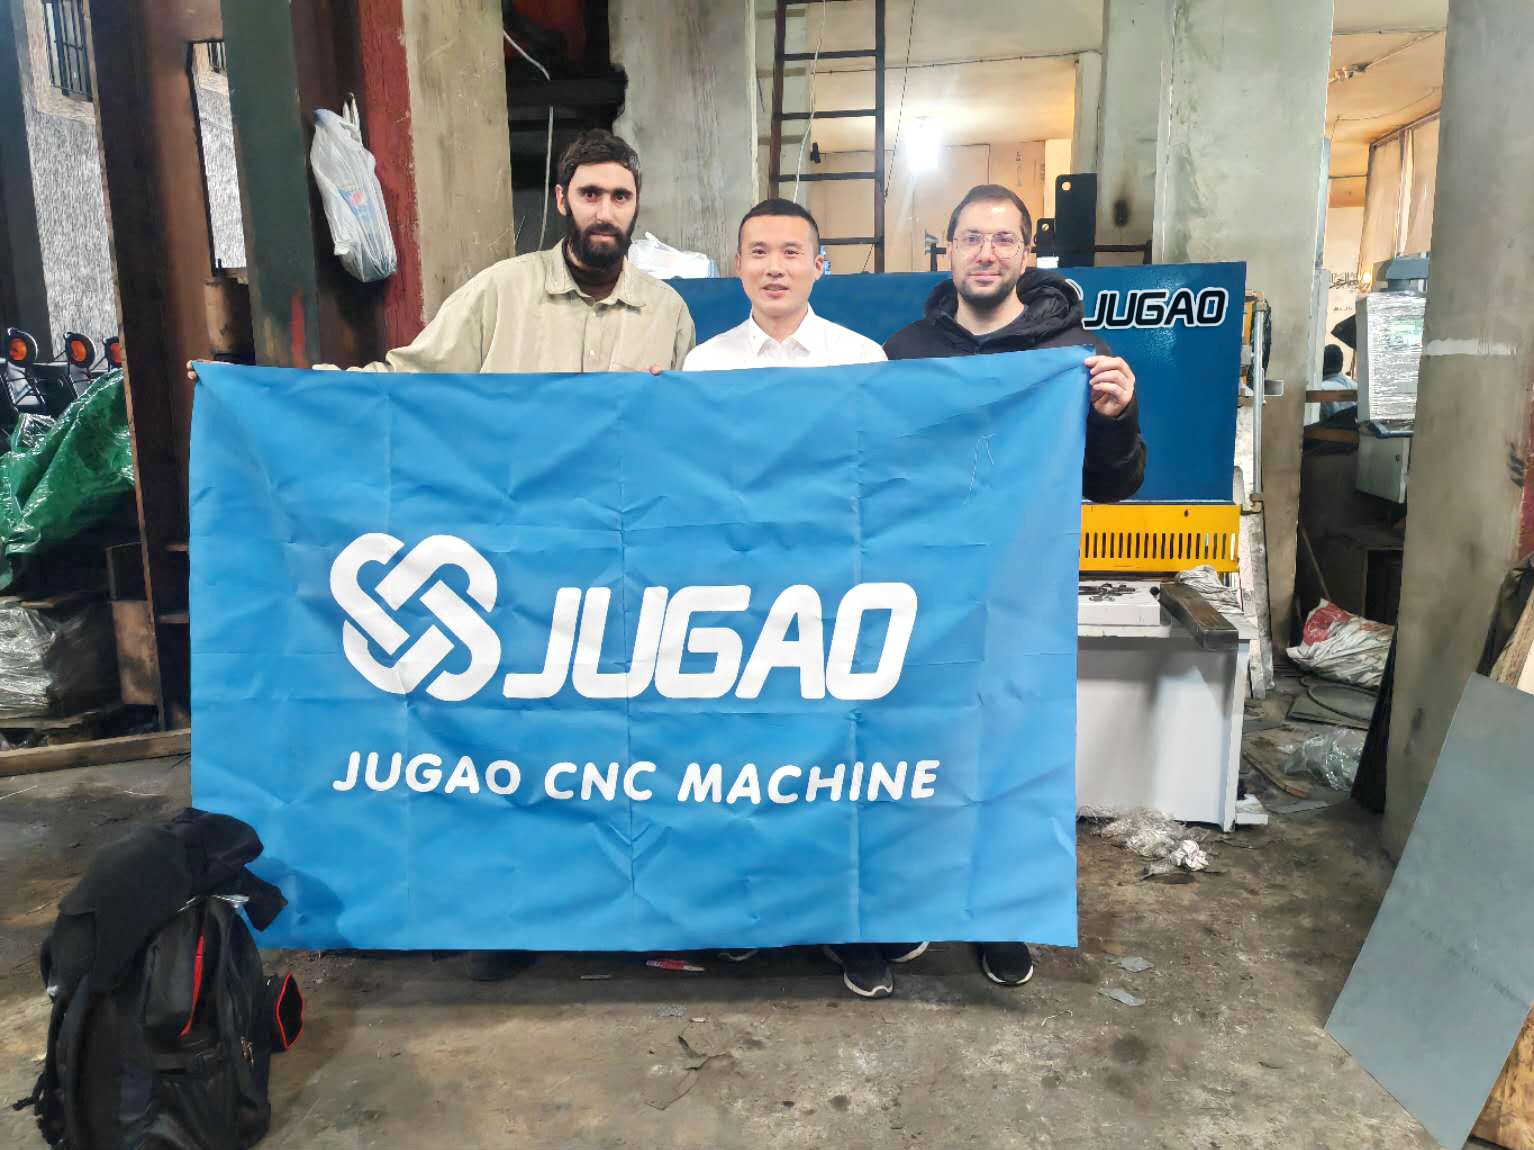 JUGAO machines help Lebanese customers improve production efficiency, and on-site training by professional engineers has been well received